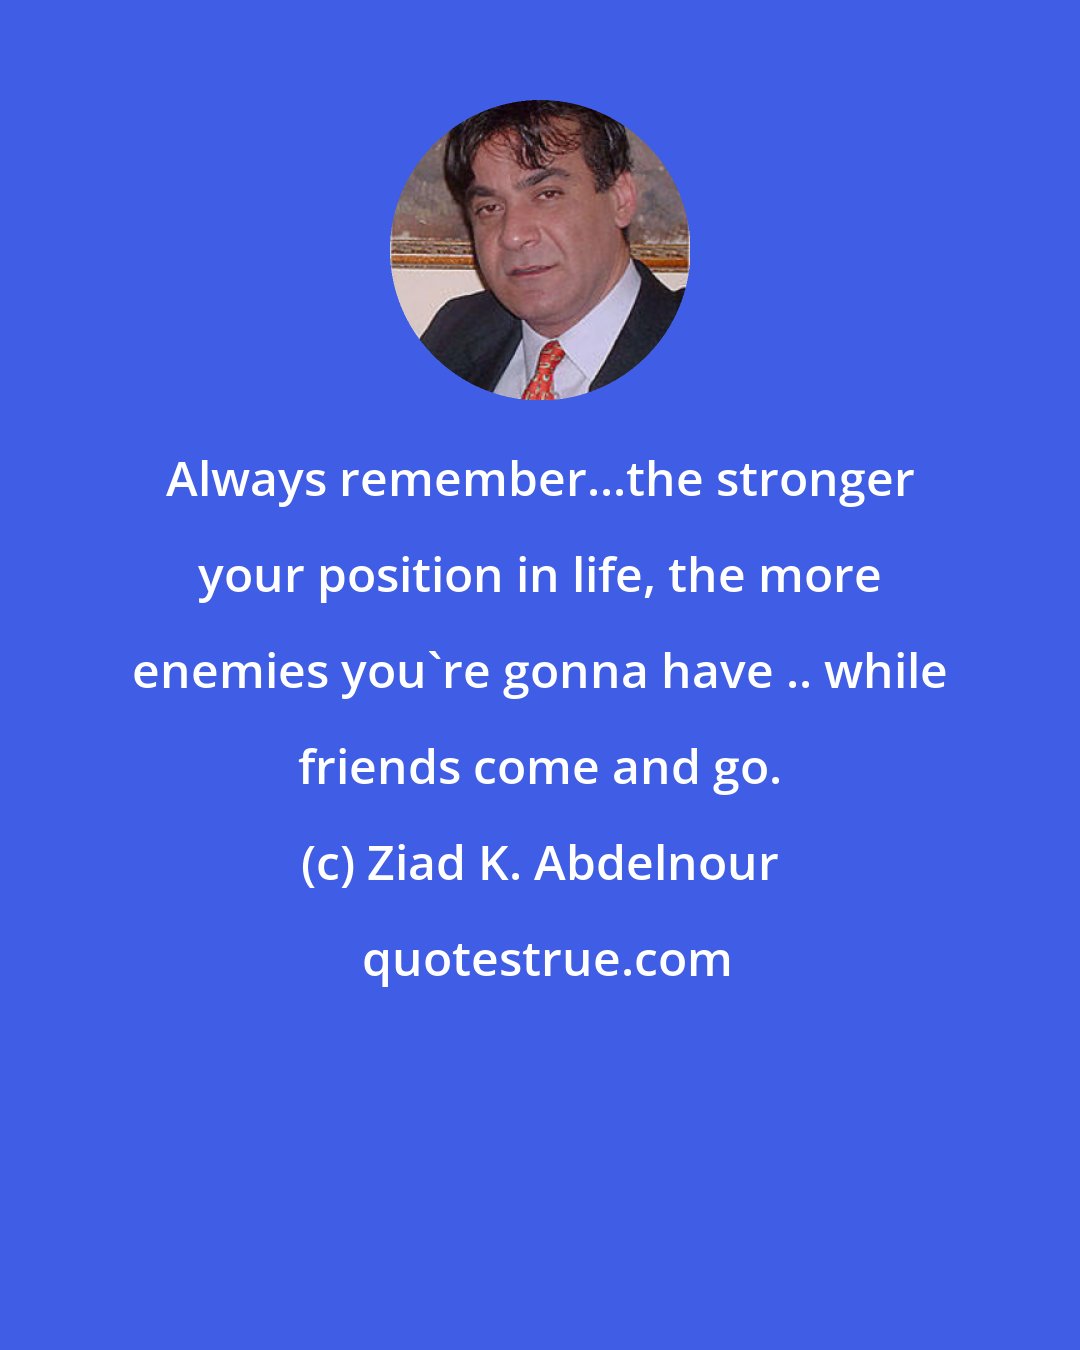 Ziad K. Abdelnour: Always remember...the stronger your position in life, the more enemies you're gonna have .. while friends come and go.